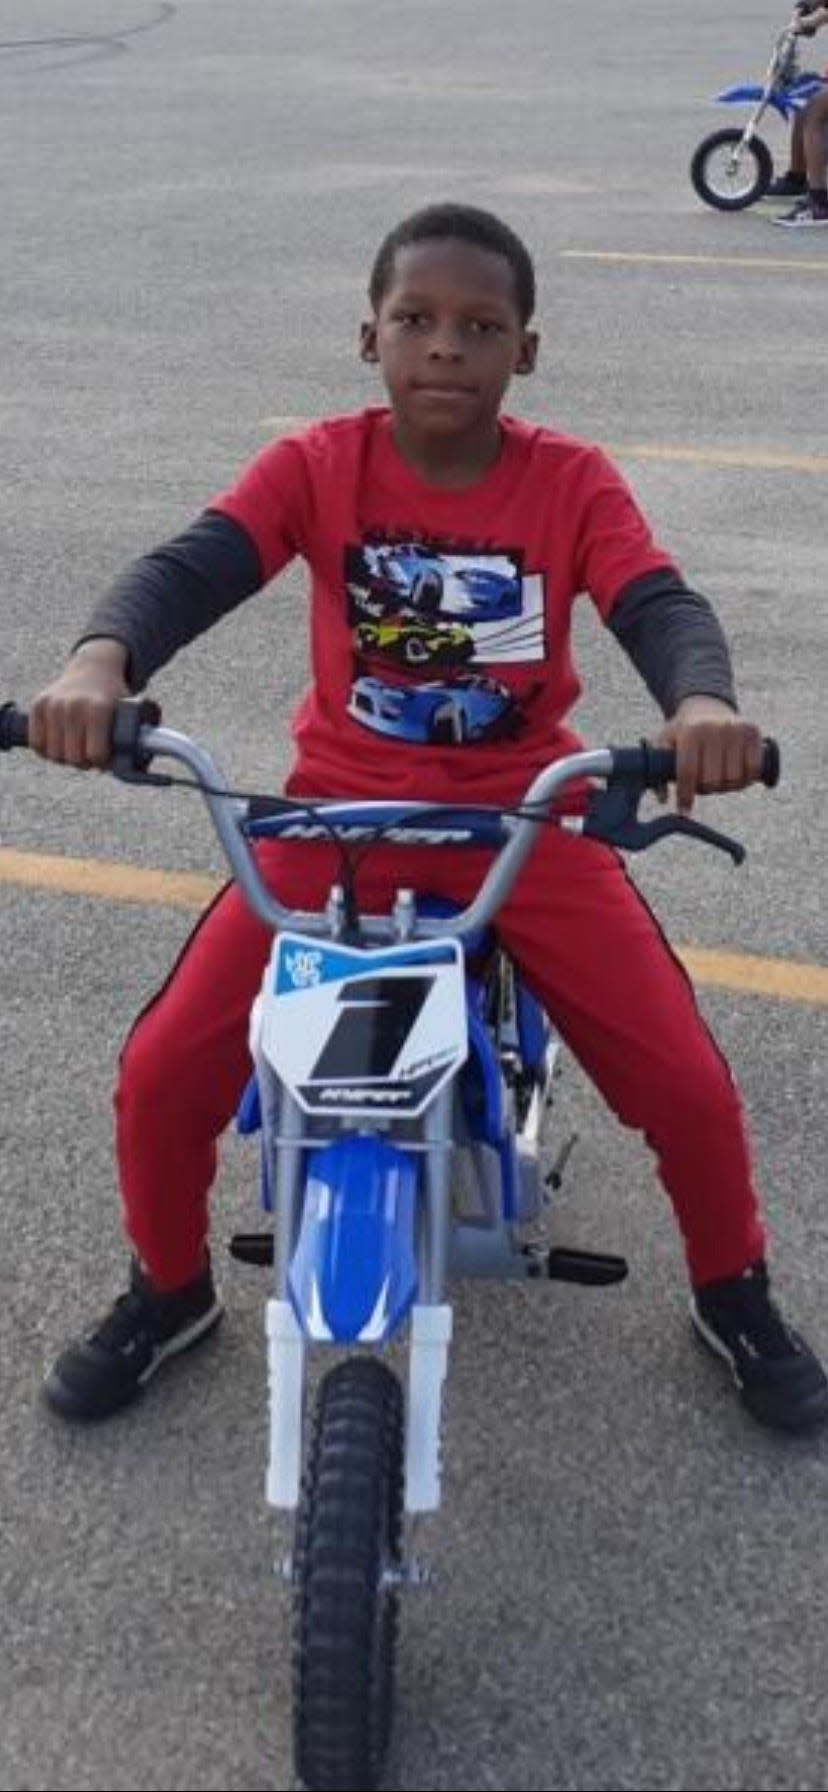 Ten-year-old Troy Erving sits on his electric-powered, dirt-bike-style bicycle in this family-supplied photo.